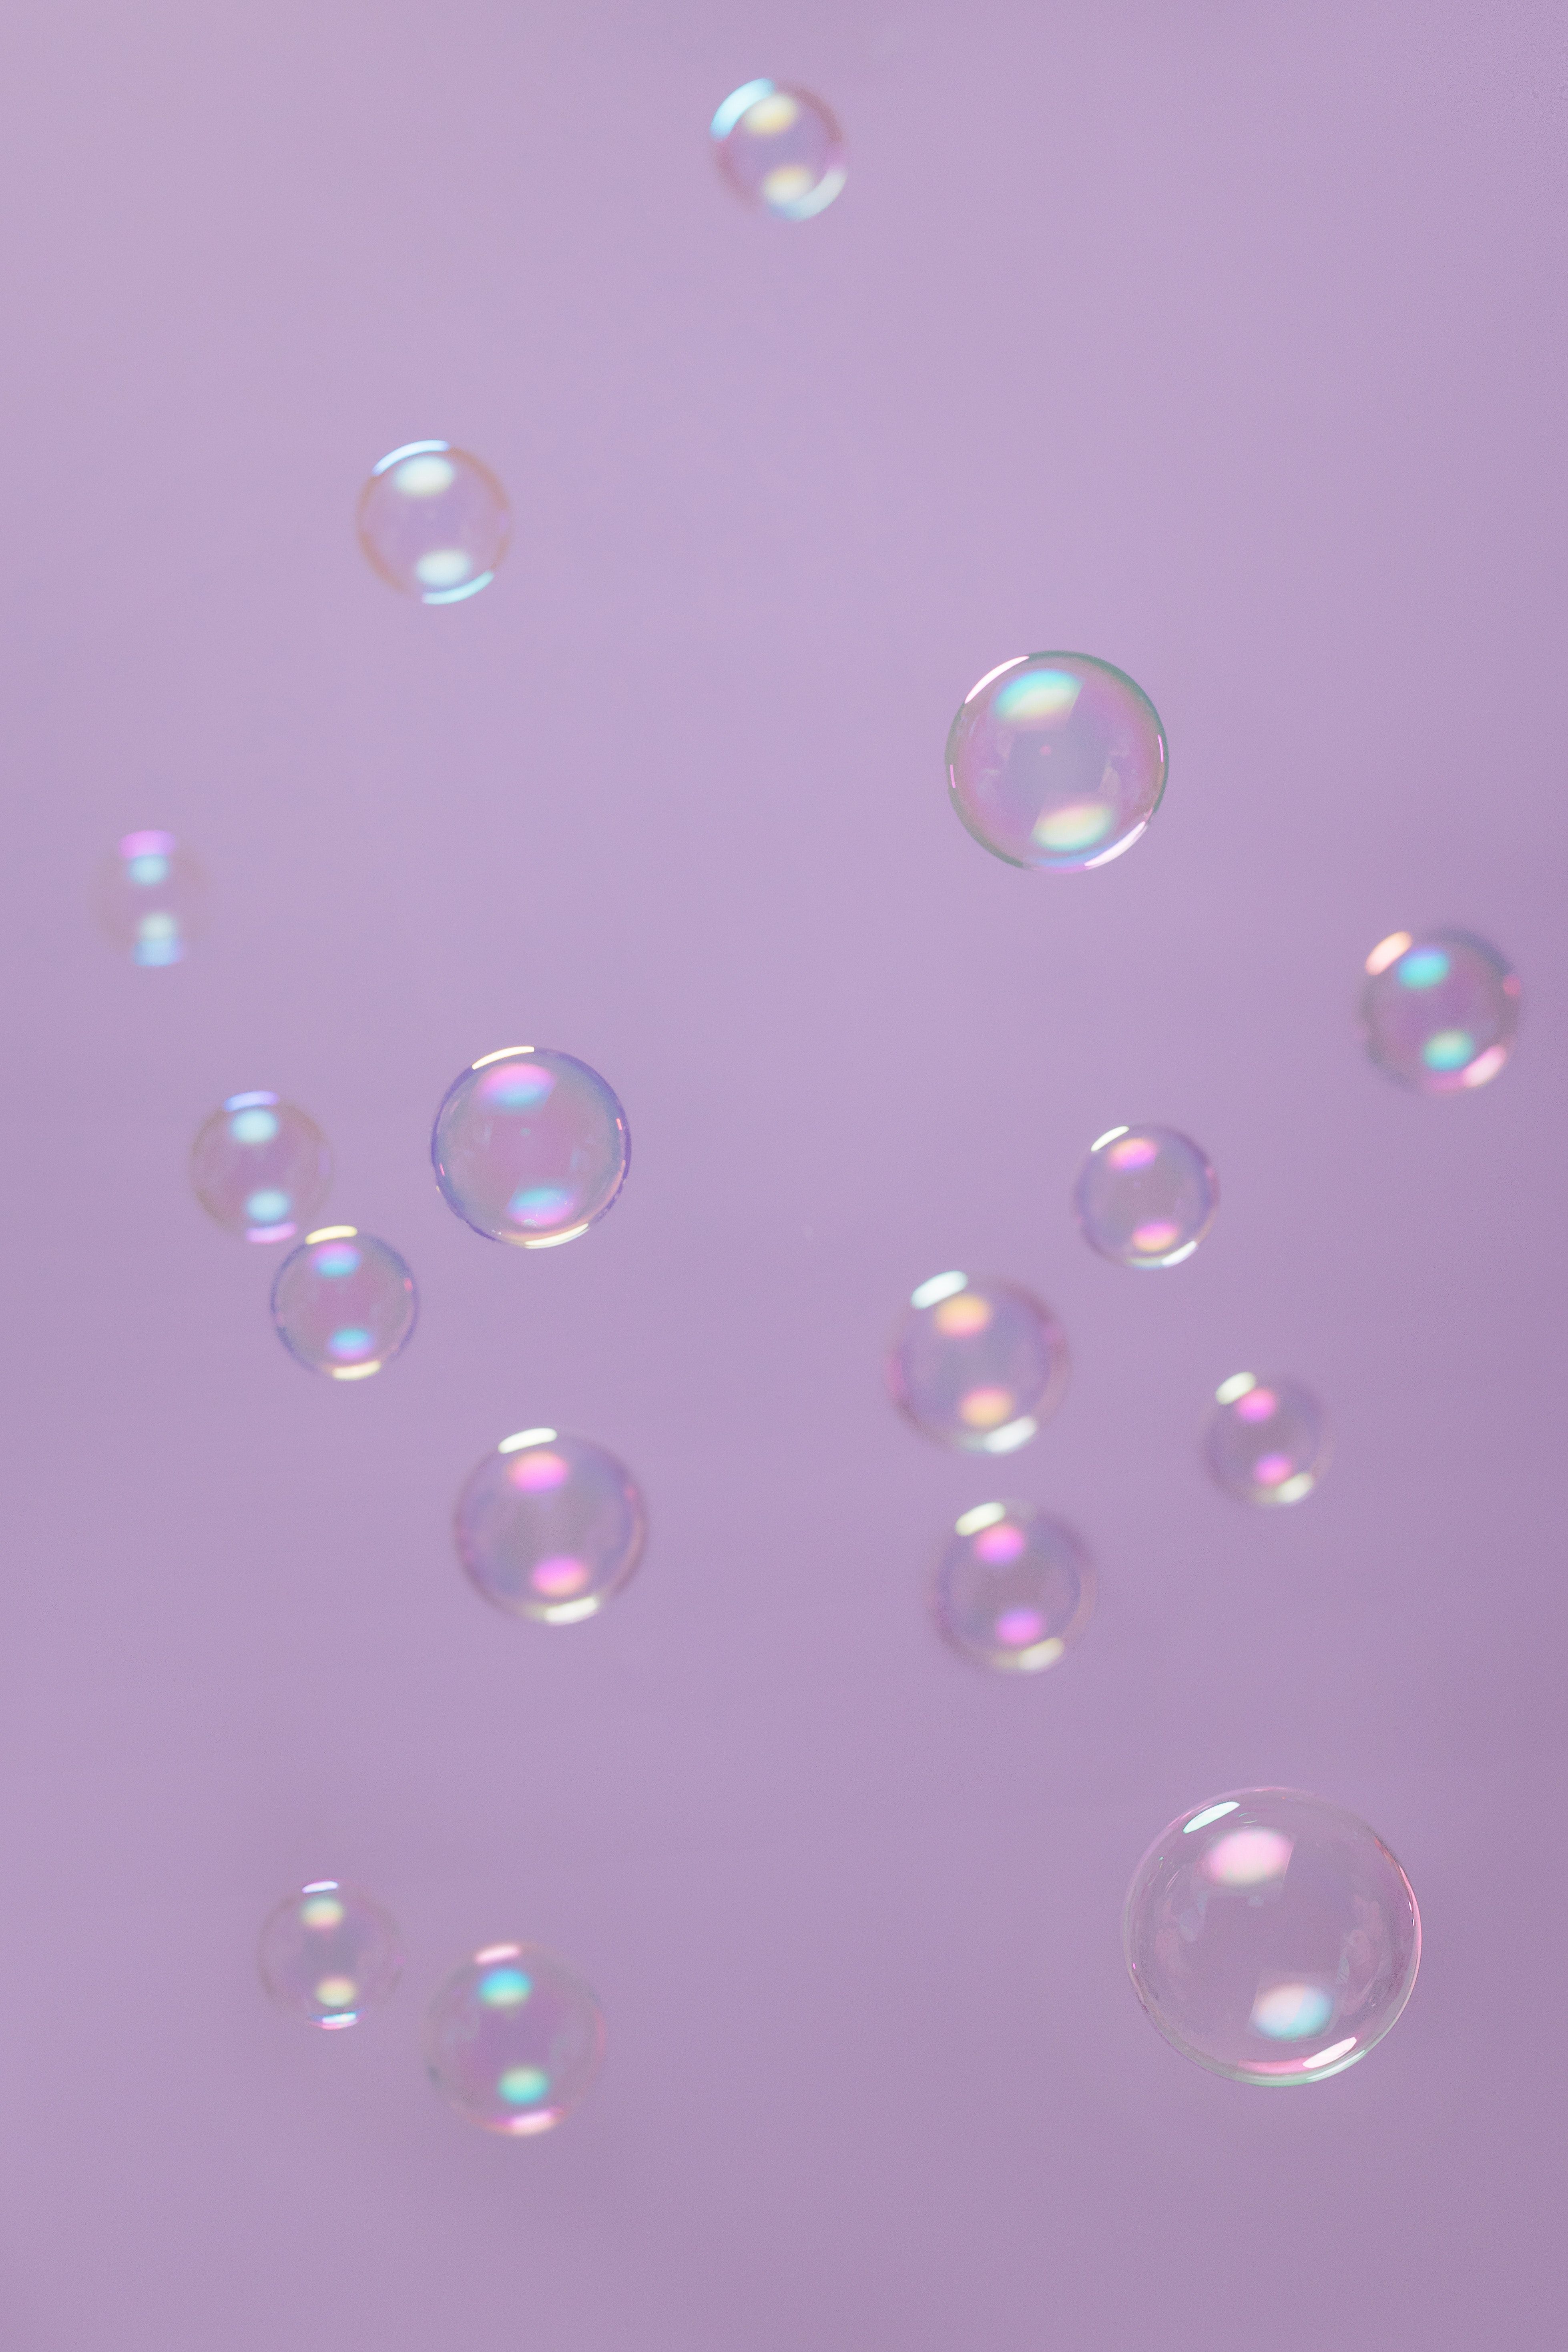 Bubbles on Purple Background · Free